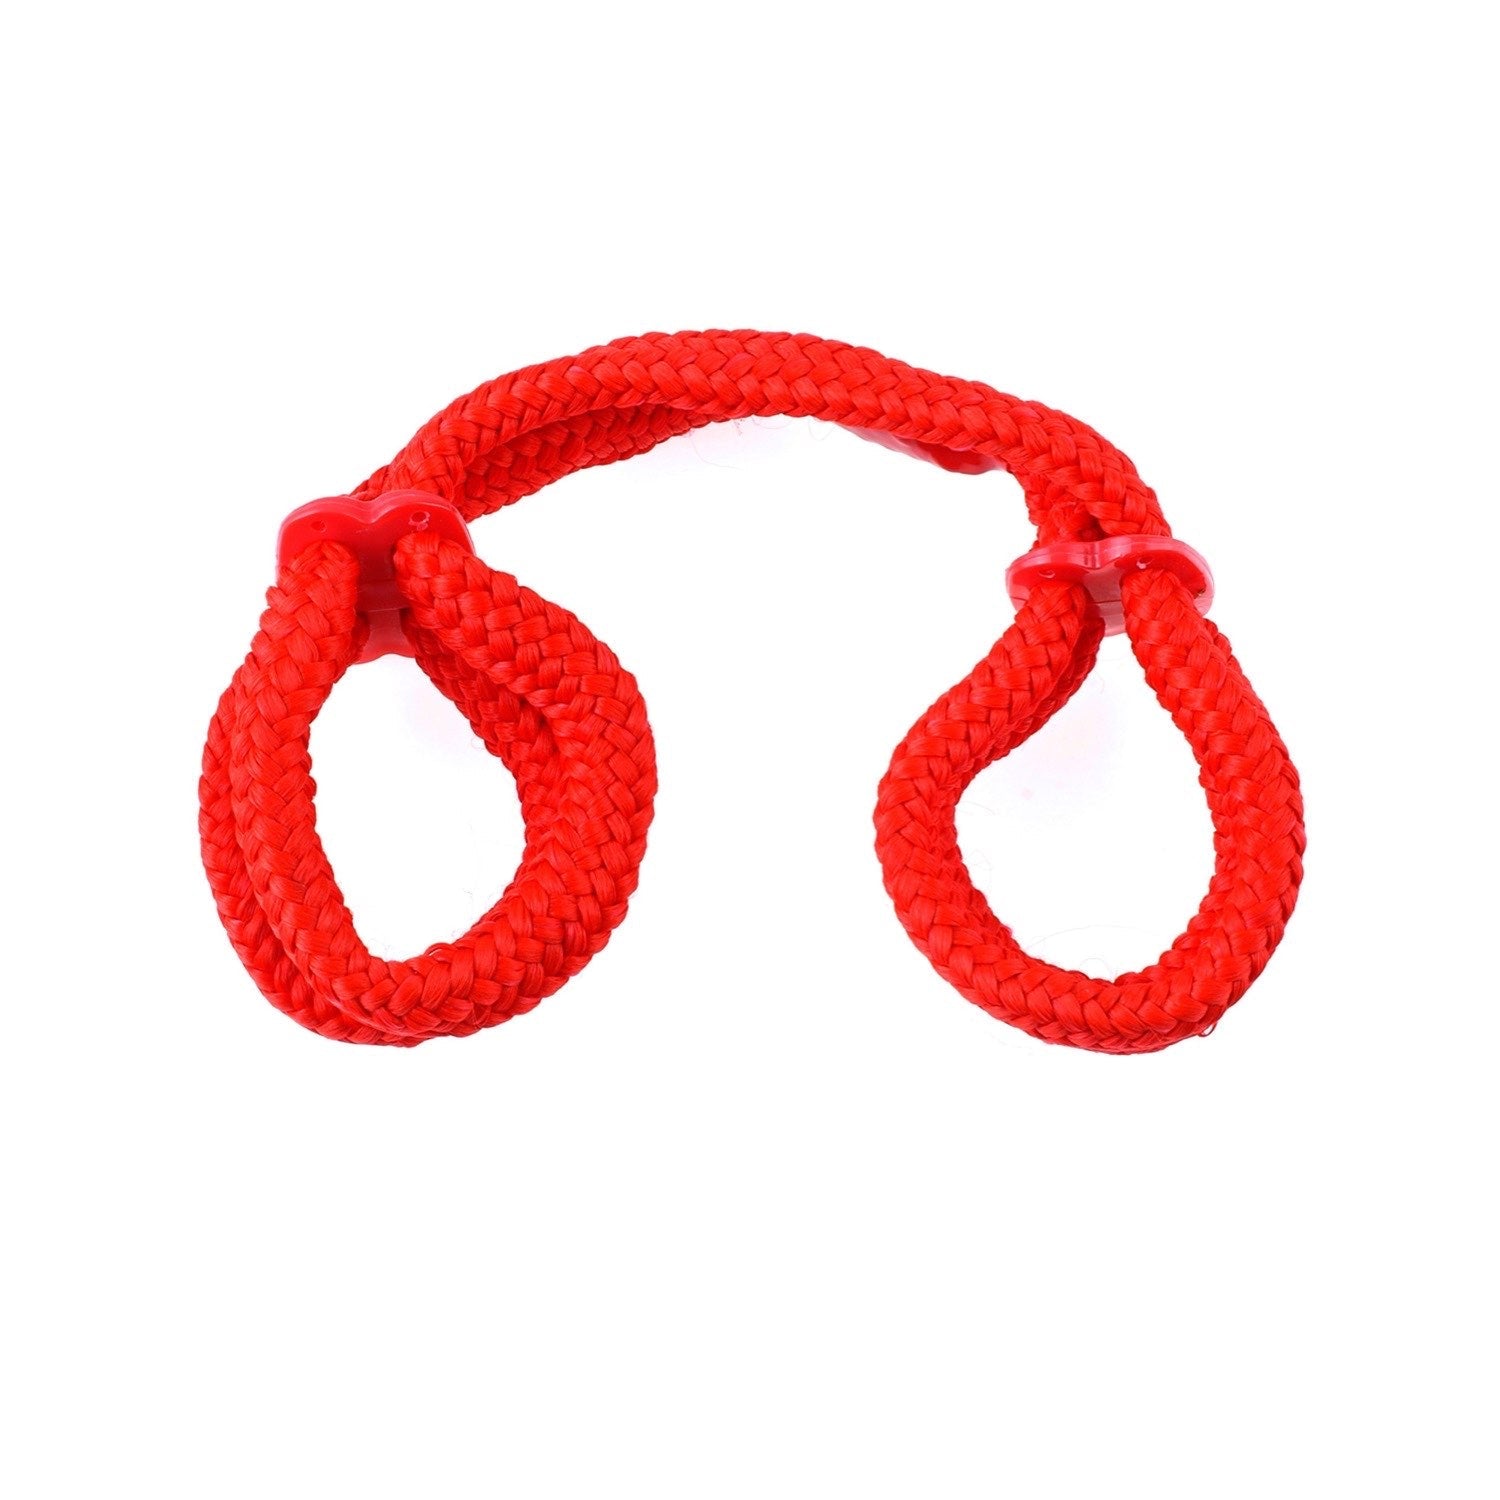 Fetish Fantasy Series Silk Rope Love Cuffs - Red Restraints by Pipedream